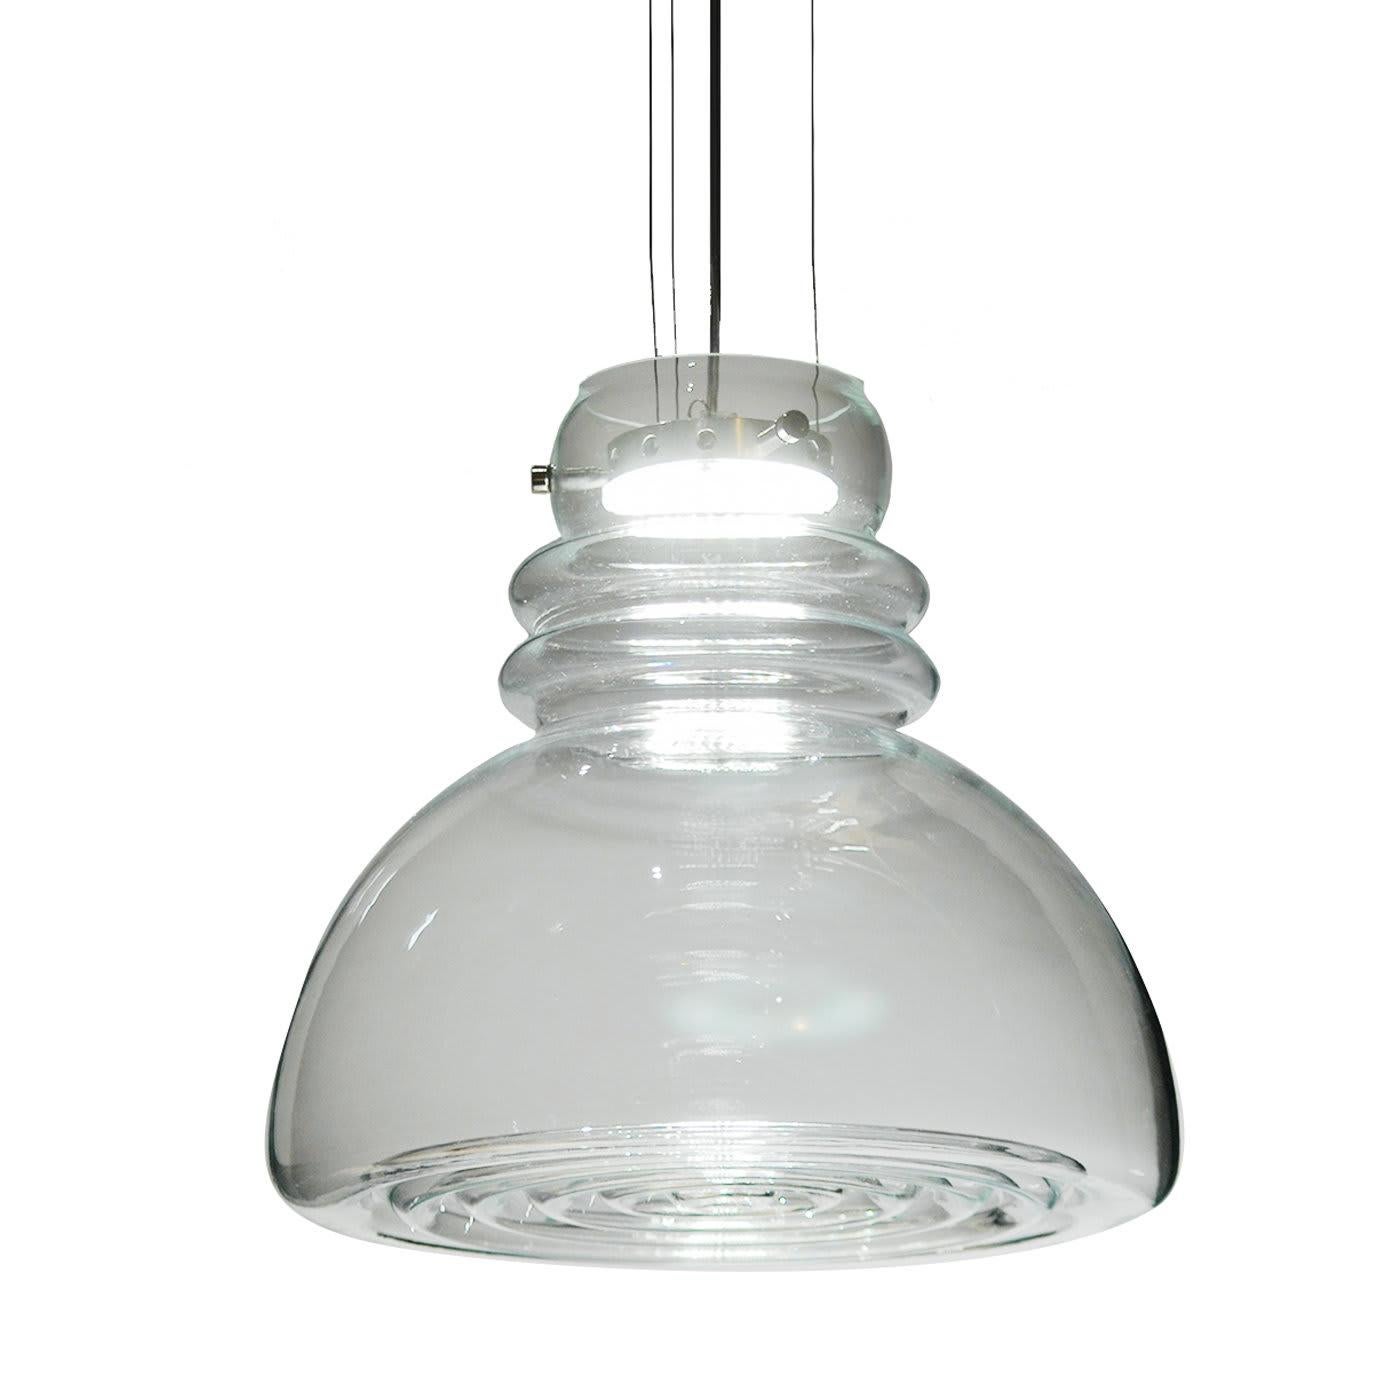 This light hangs suspended from the ceiling using three adjustable cables. It is perfect for illuminating spaces beneath it, diffusing its light through the Frensnel lens like bottom focusing it towards the center. The pure clear class adds an